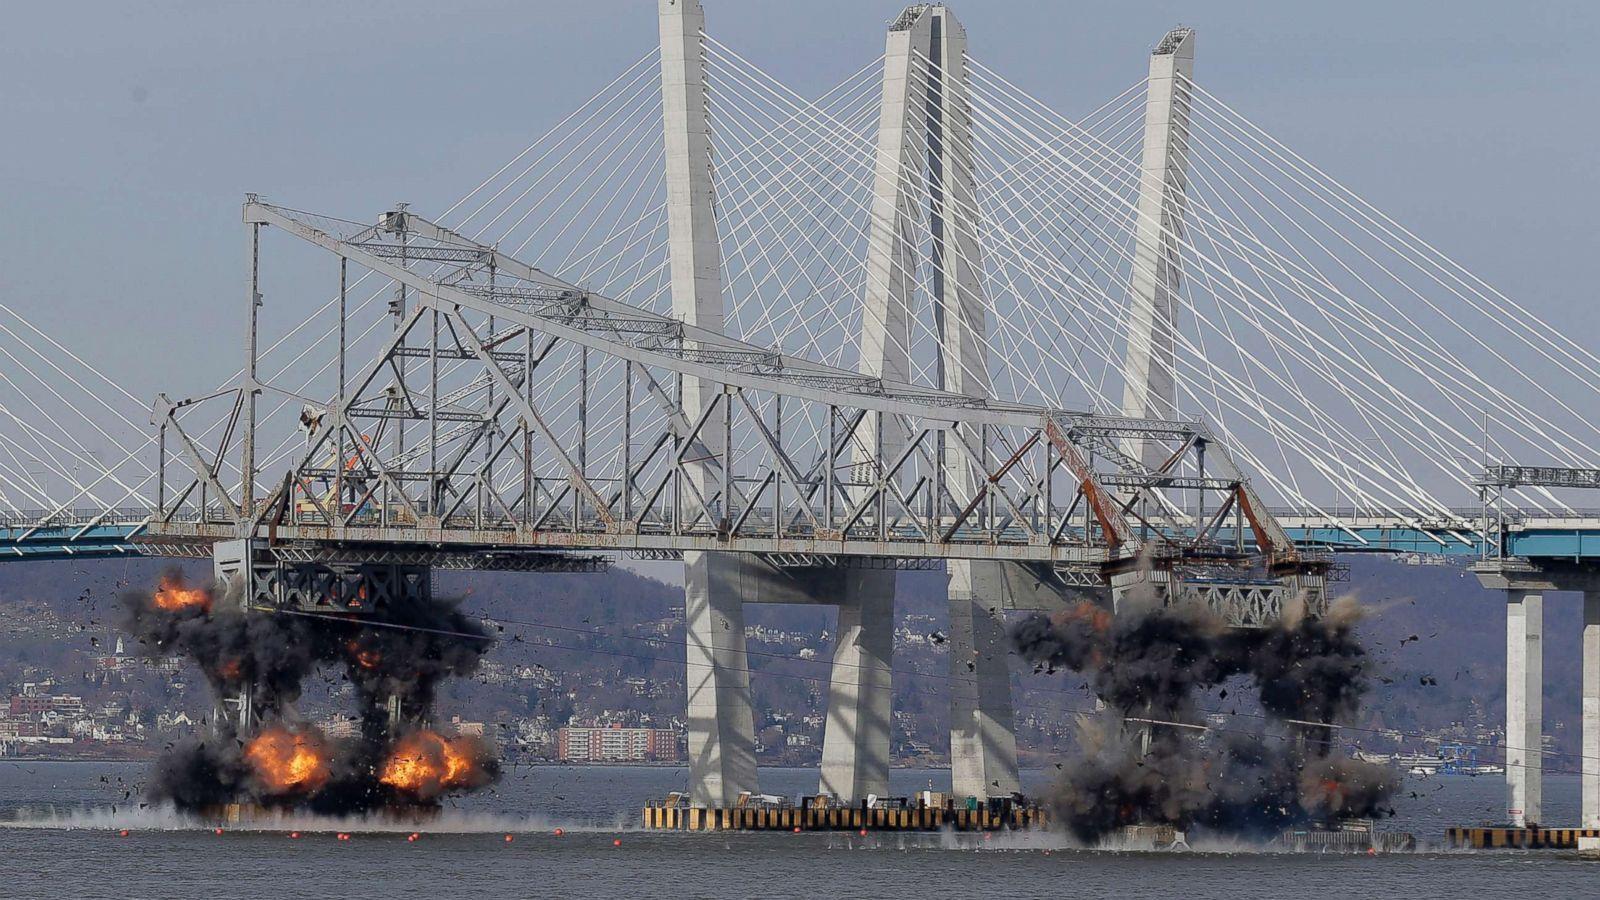 Old Tappan Zee Bridge plunges into the Hudson River in spectacular